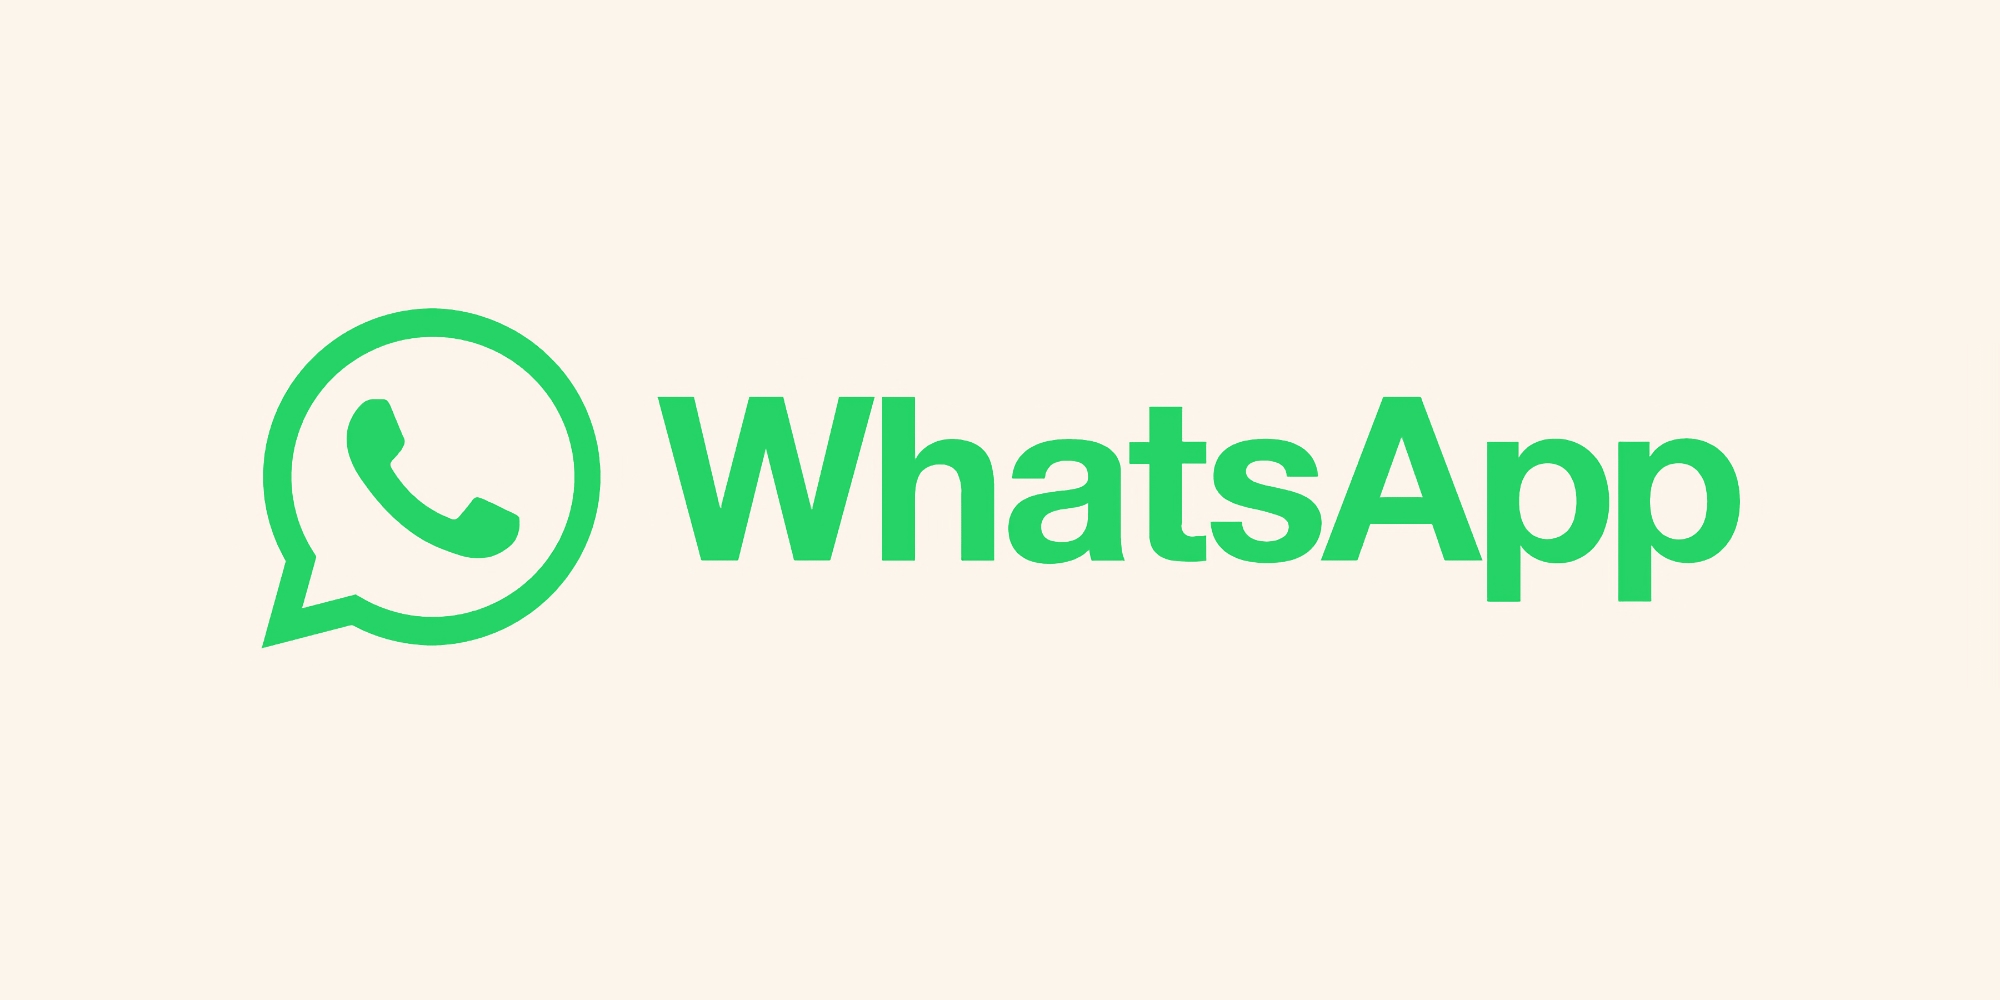 WhatsApp is testing a Secret Code feature for chats in the Android app